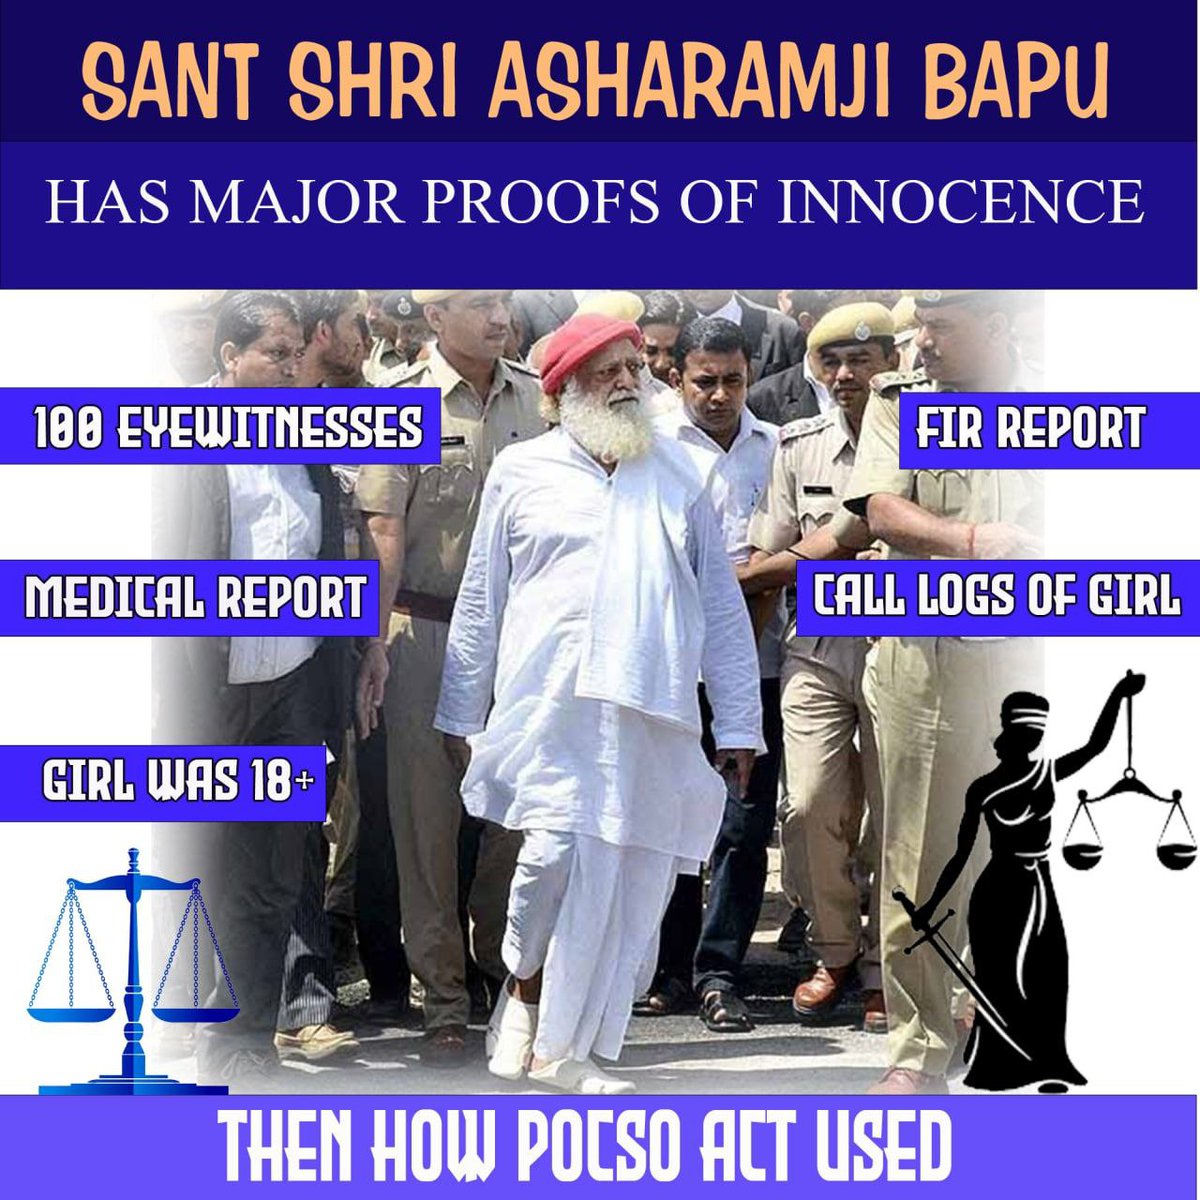 Salman Khan was convicted for hunting 2 black deer in 1998 and was sentenced to jail for 5 years, but he got bail in 2 days. Why innocent
Sant Shri Asharamji Bapu is trapped in Fake Cases and has not been given bail or parole for a single day. 
#AreHumanRightsEqualForAll